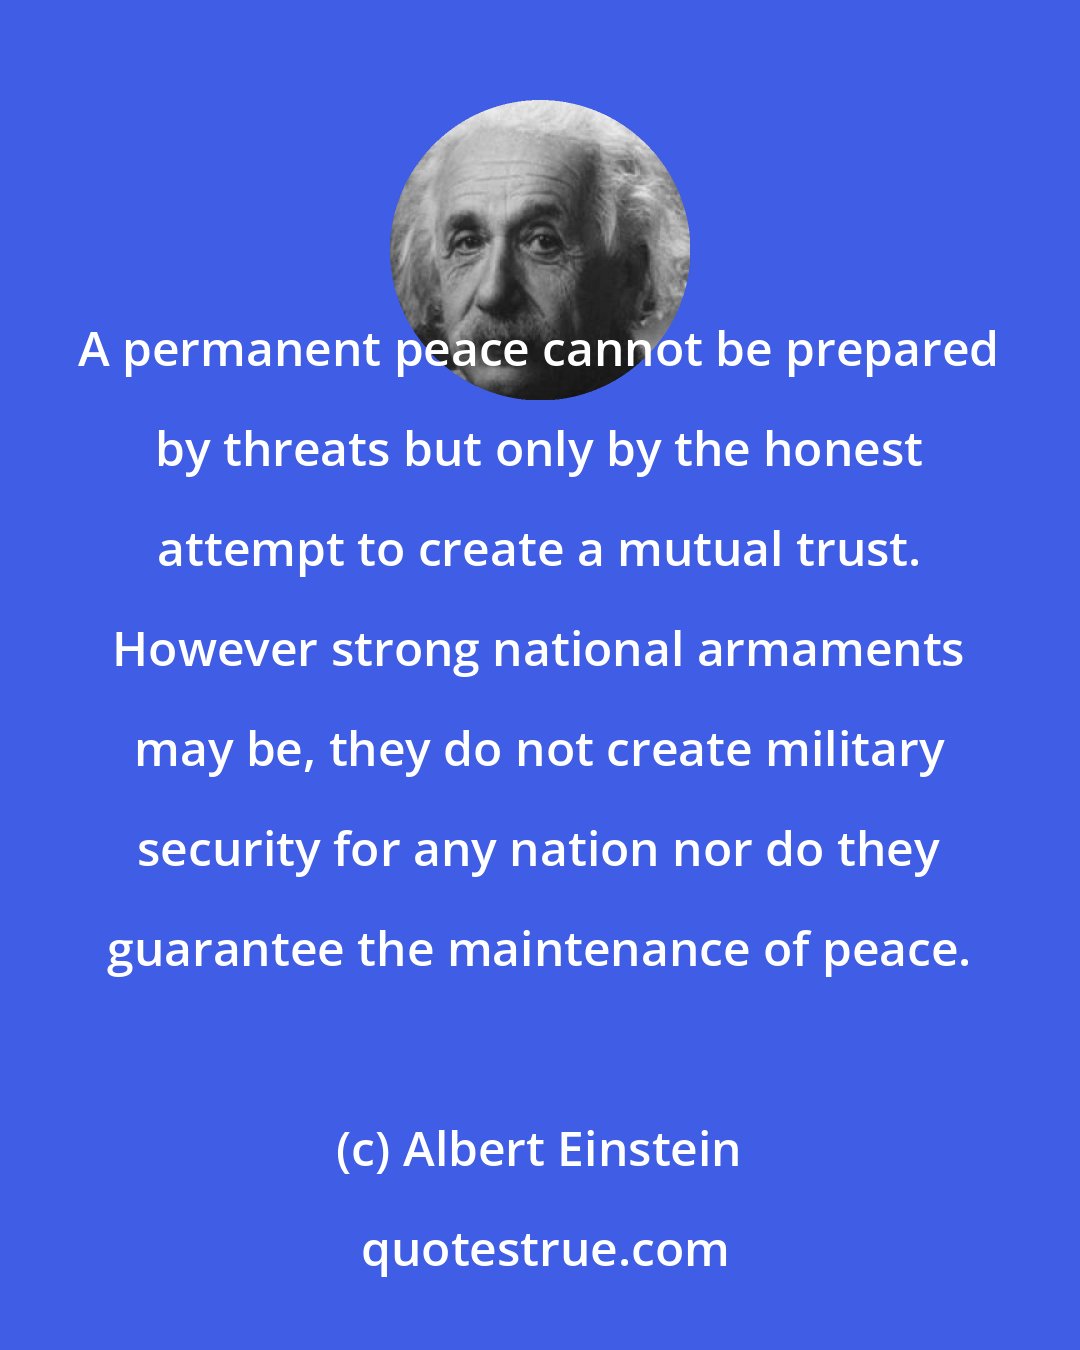 Albert Einstein: A permanent peace cannot be prepared by threats but only by the honest attempt to create a mutual trust. However strong national armaments may be, they do not create military security for any nation nor do they guarantee the maintenance of peace.